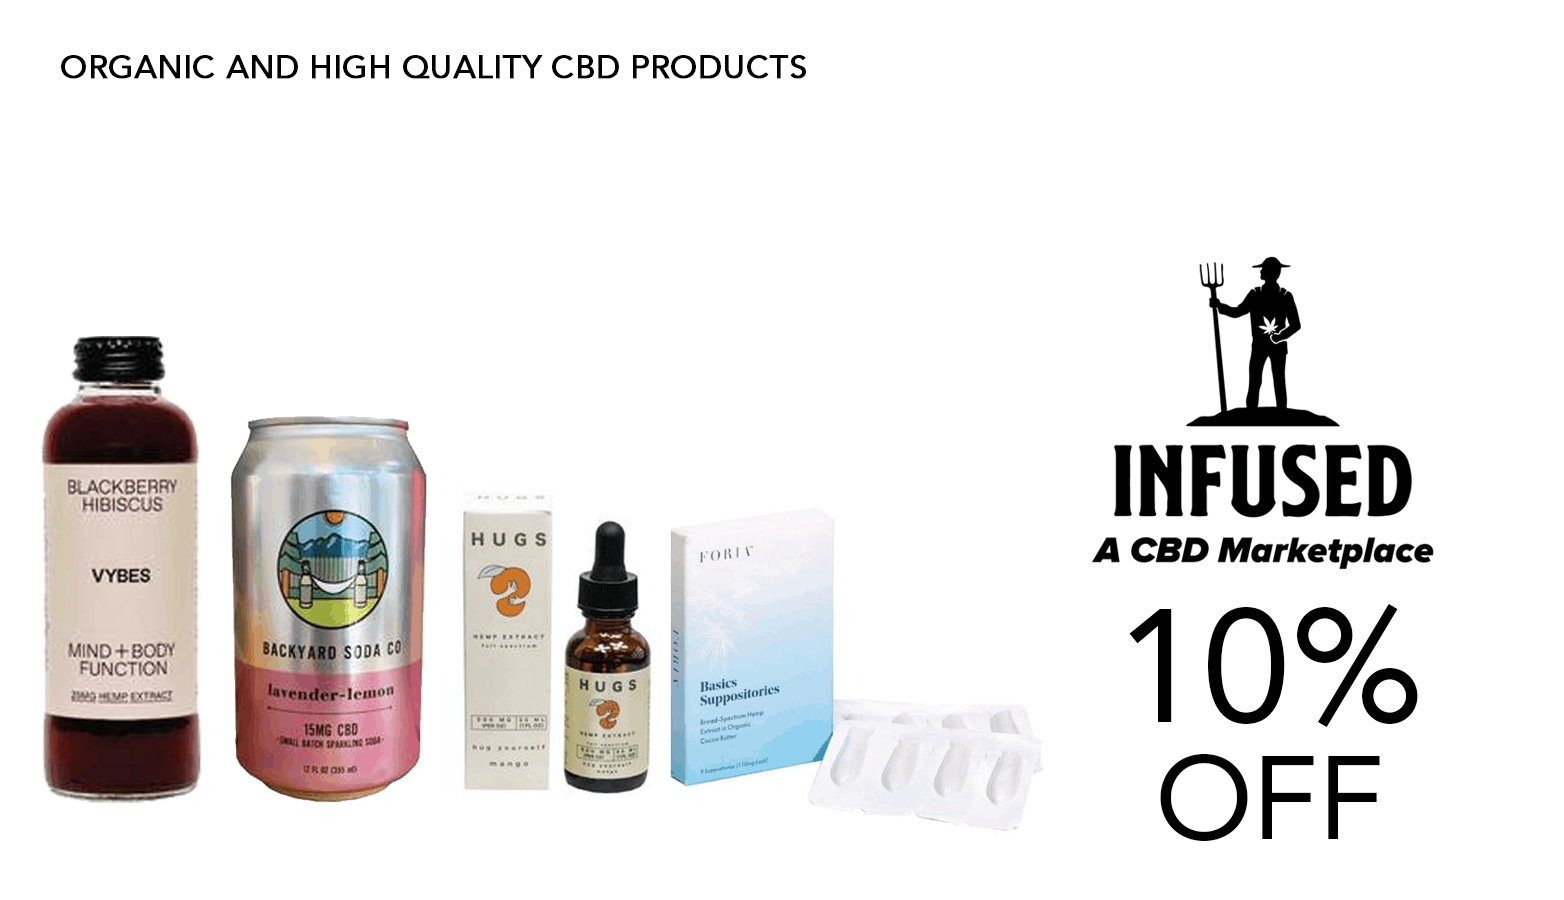 Infused A CBD Marketplace Coupon Code Offer Website